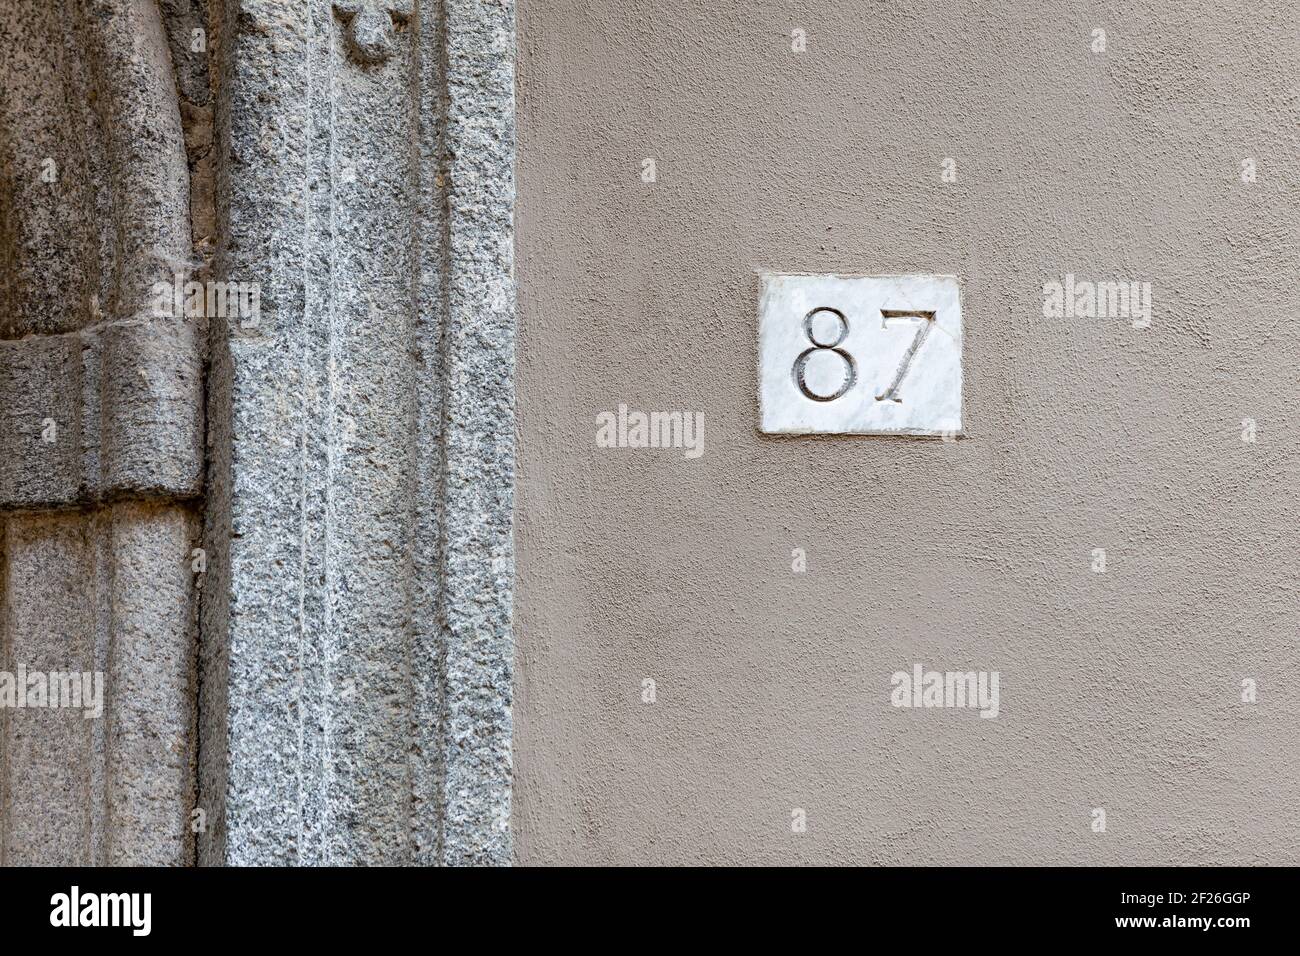 87 ancient house number, concept number Stock Photo